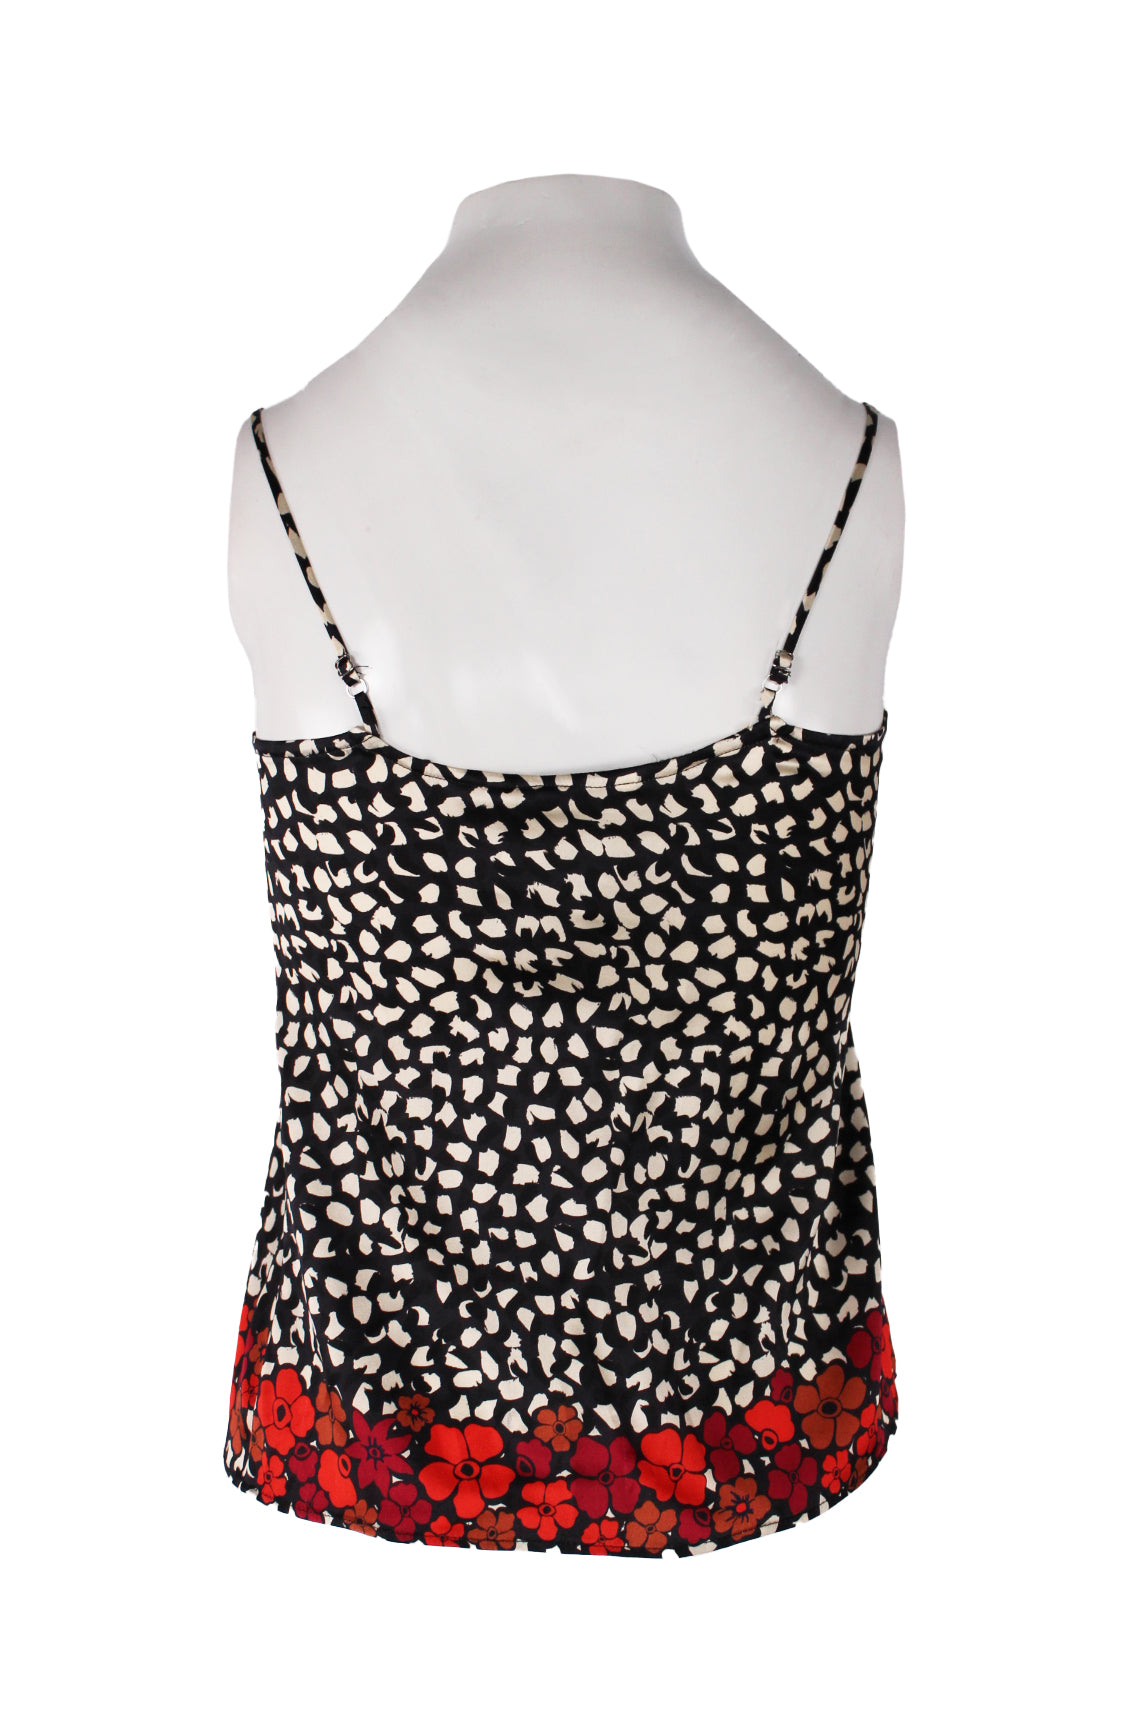 rear of black, white and red floral motif camisole with adjustable, spaghetti style shoulder straps. 